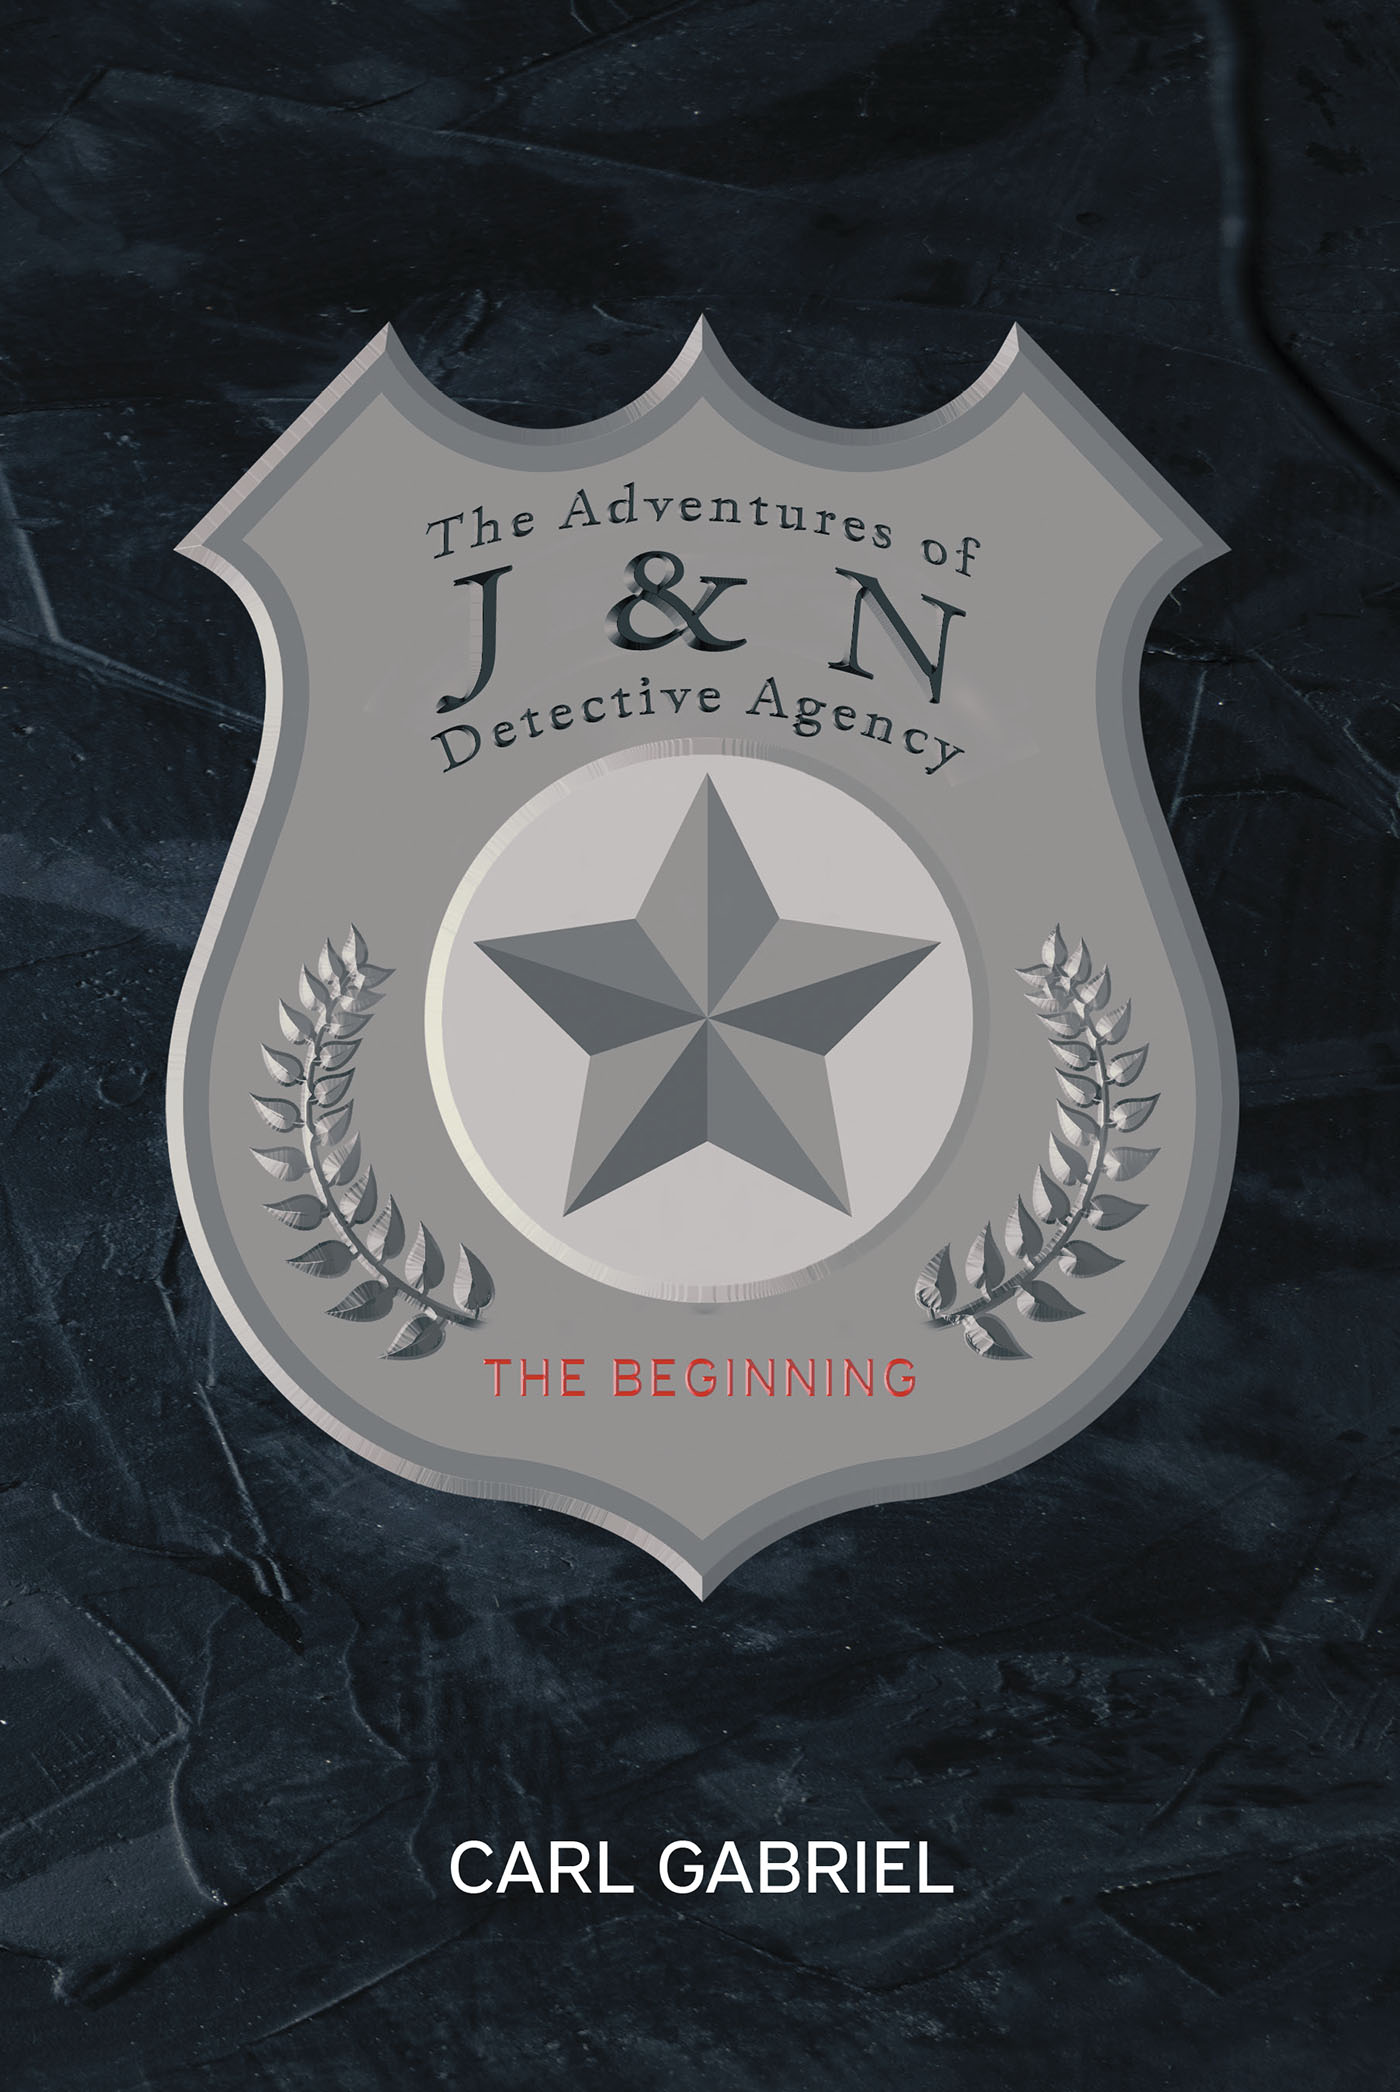 Carl Gabriel’s New Book, "The Adventures of J & N Detective Agency: The Beginning," is a Whirlwind Tale Chronicling the Thrilling Origins of Detective Jim Davis’ Agency